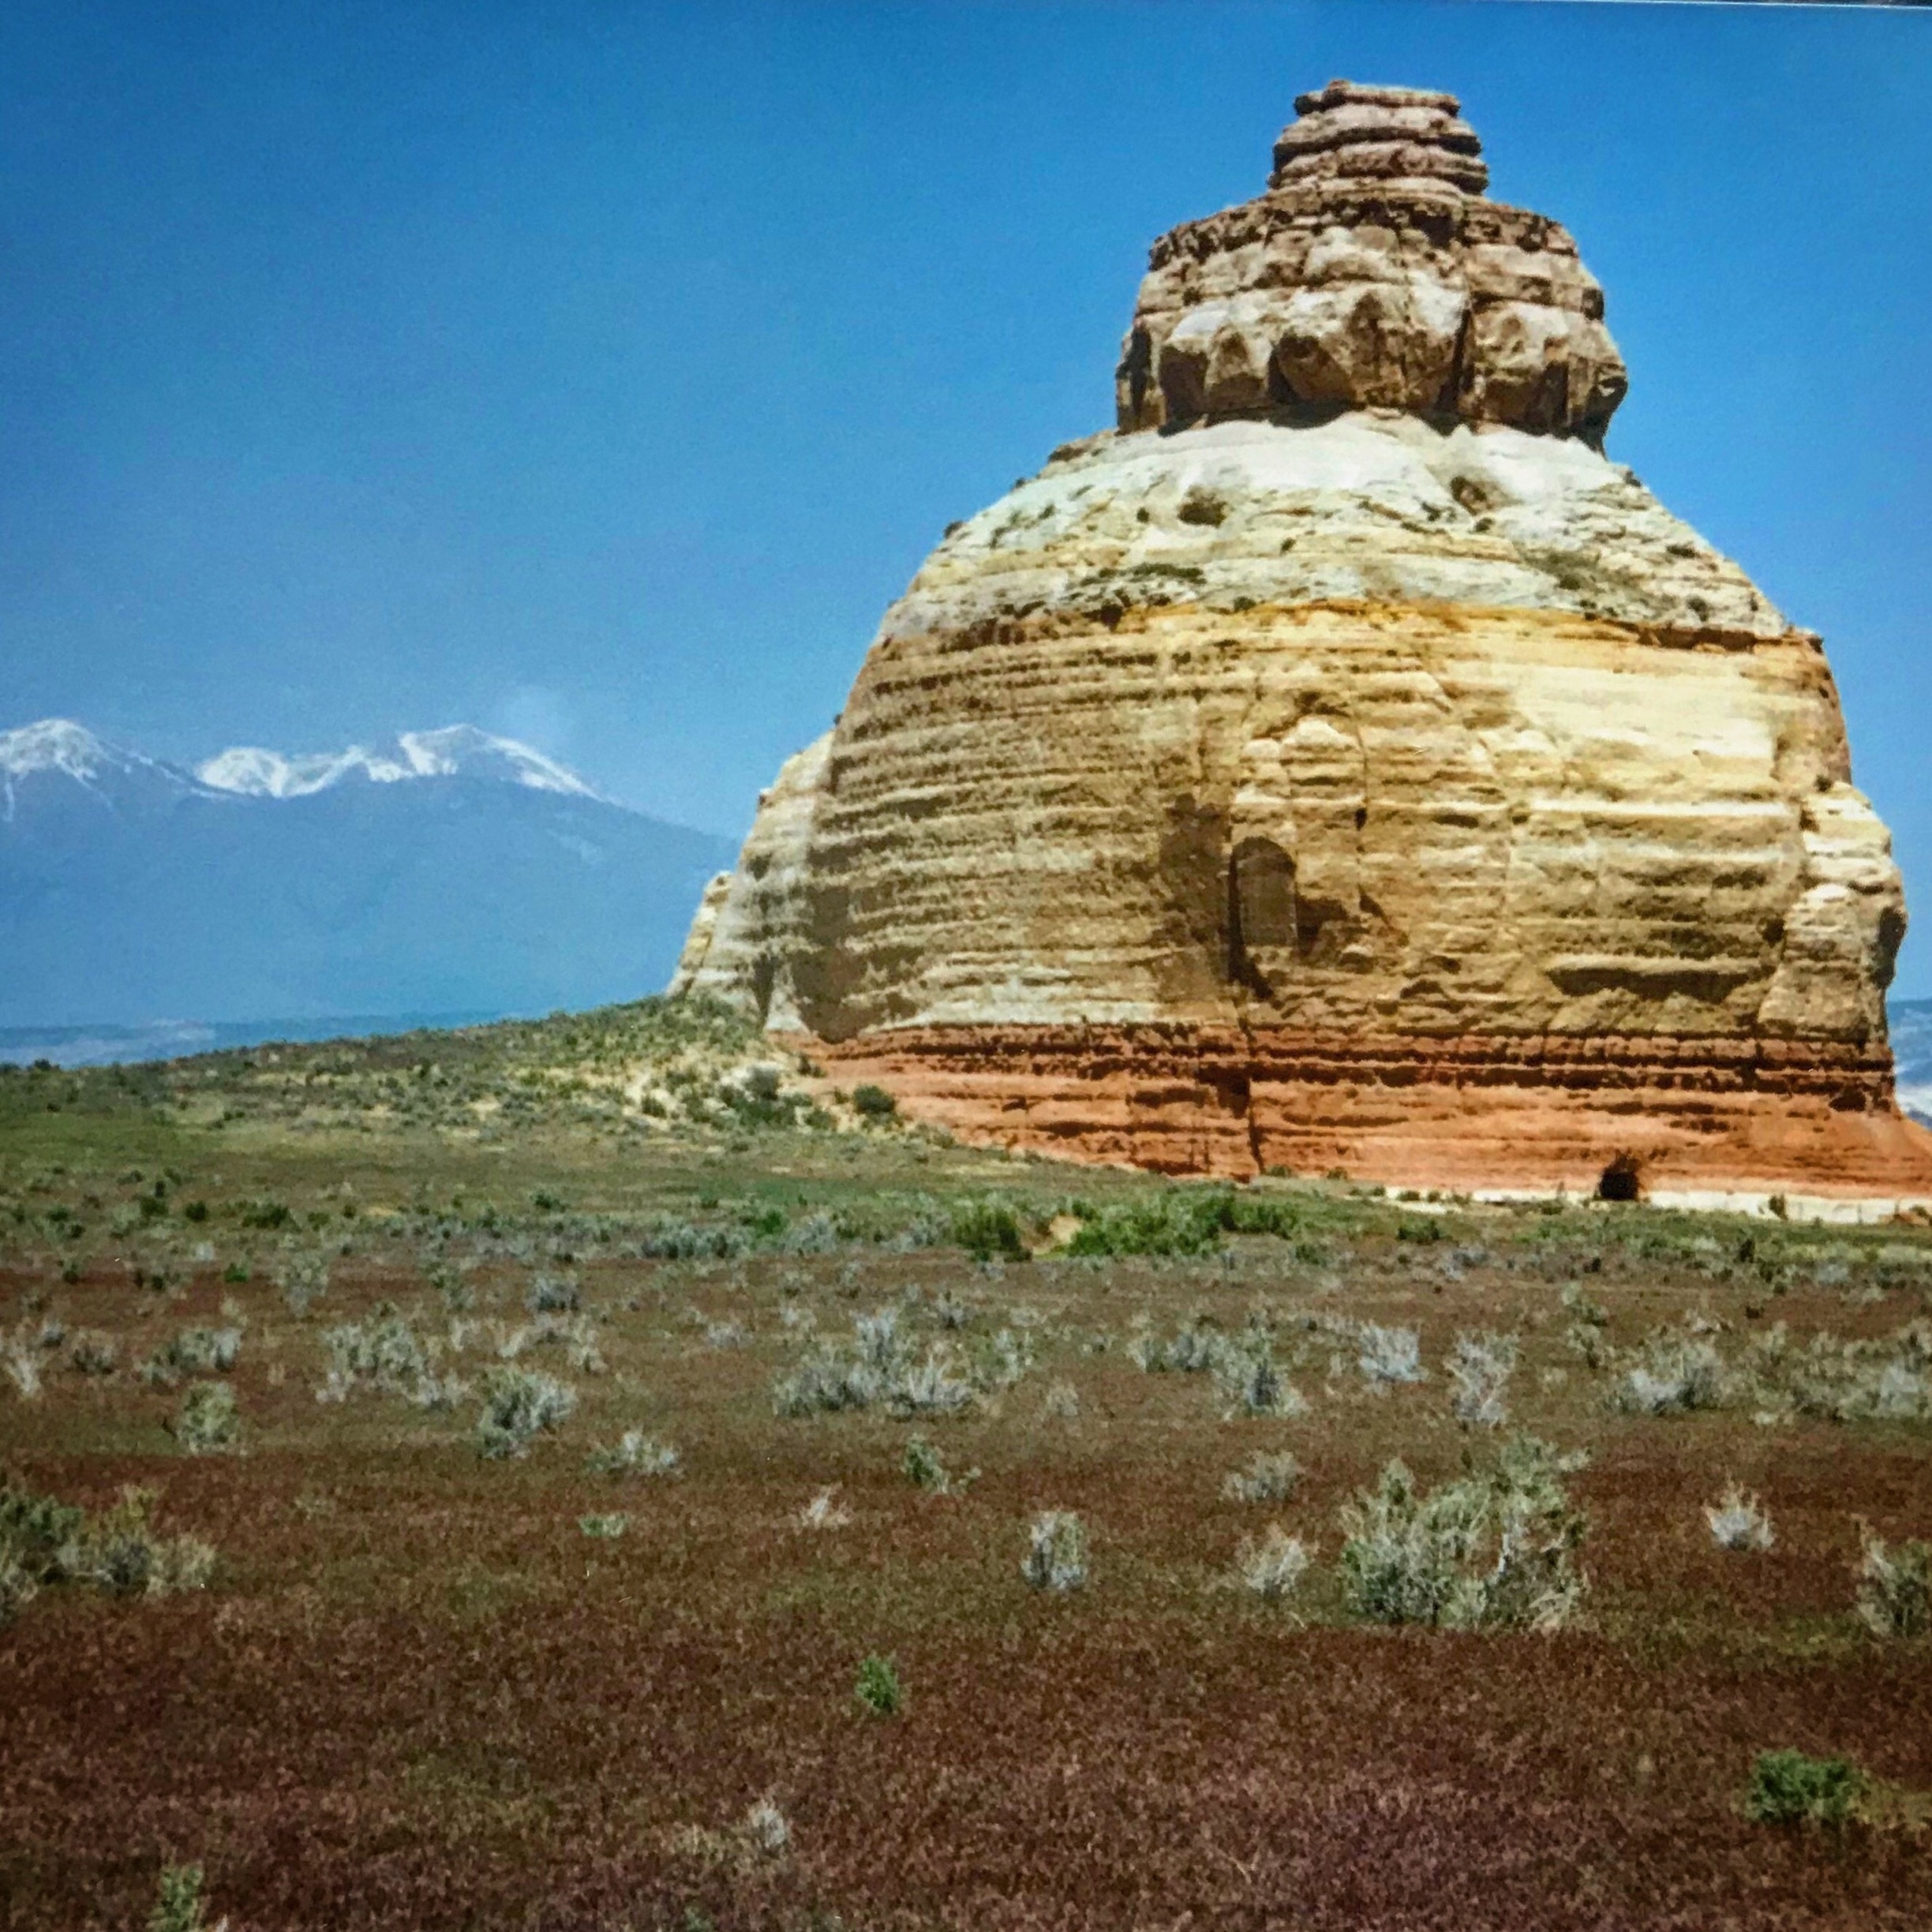 I don’t think Bears Ears existed as a National Monument when I shot this in 1987. Why didn’t they have geotagging with 35mm? #oldschool #filmphotography  